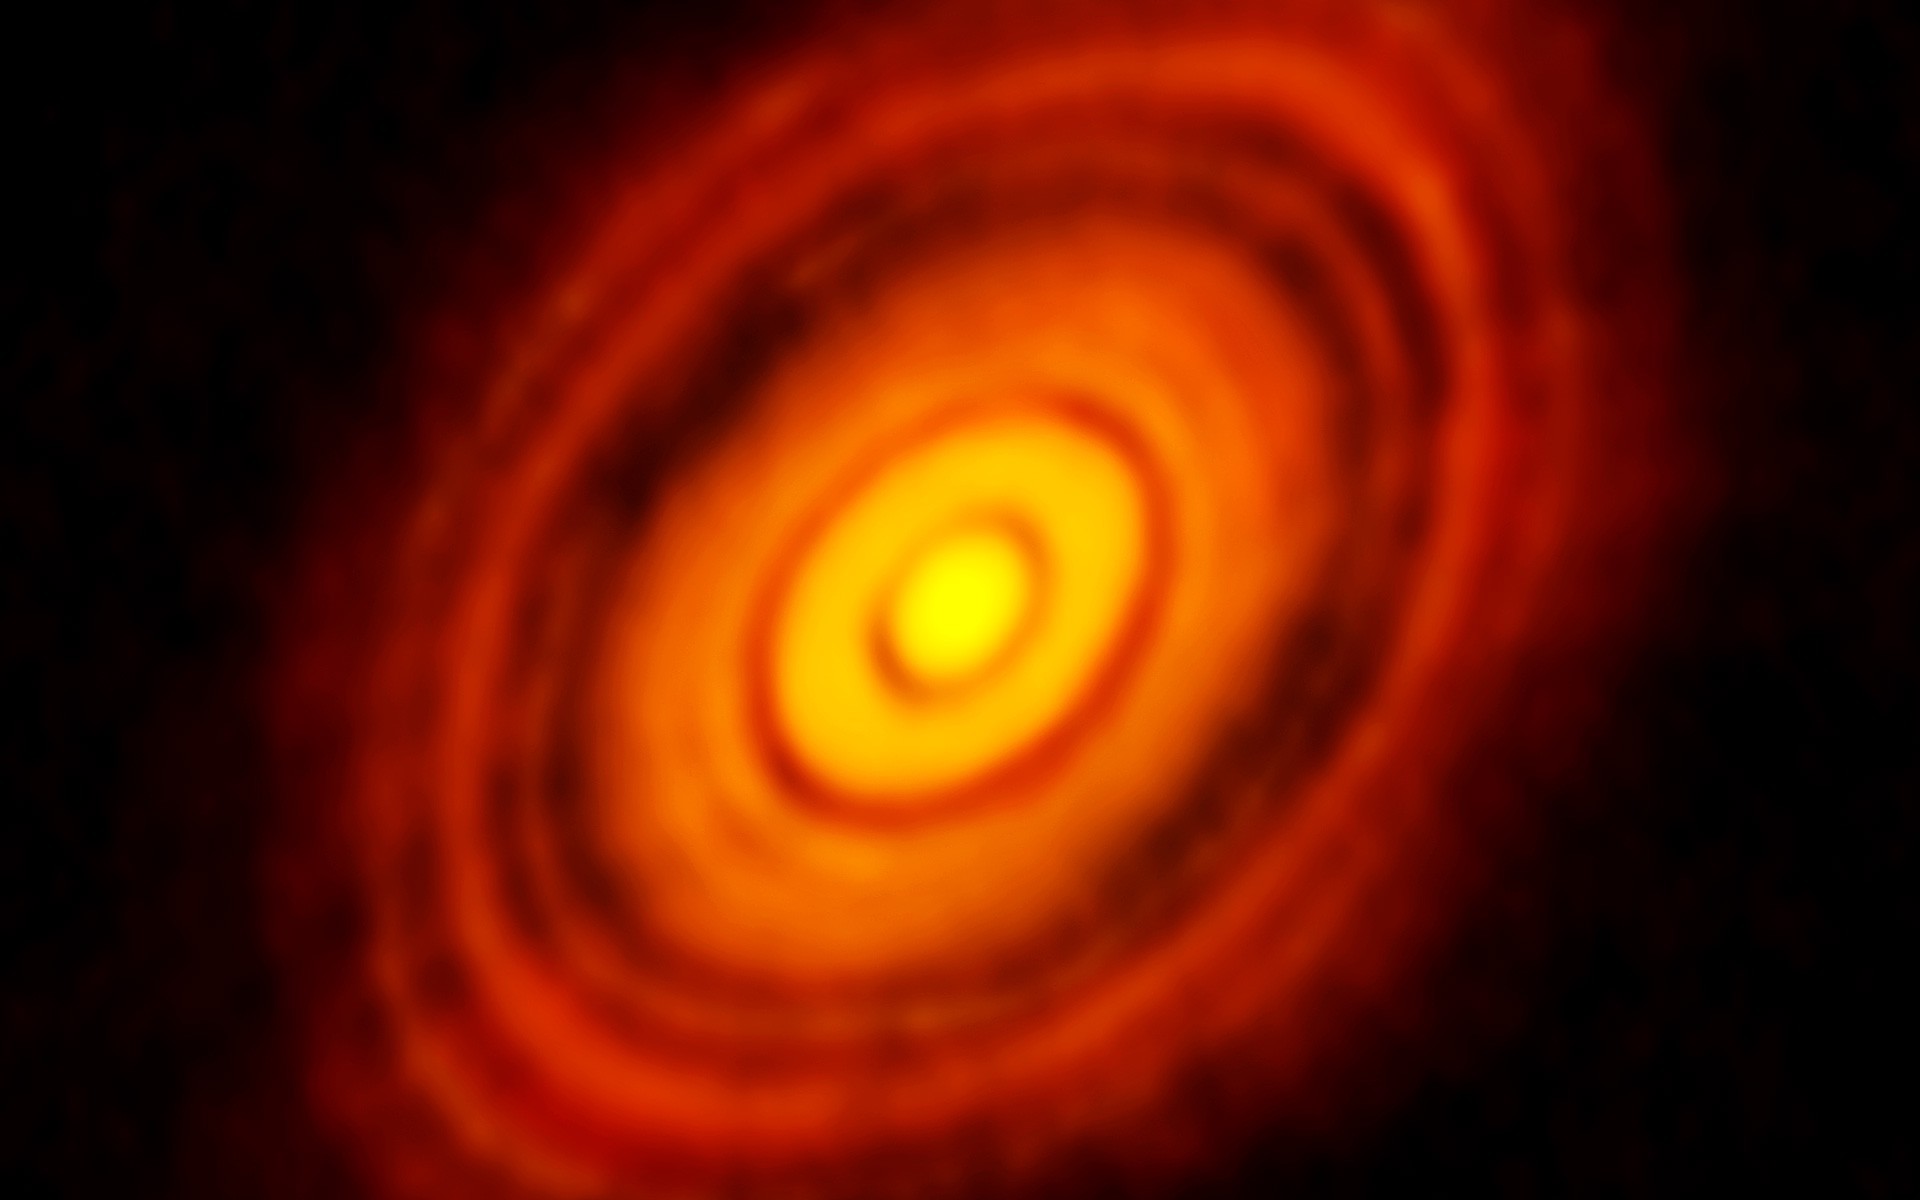 We can now observe planets forming around other stars.